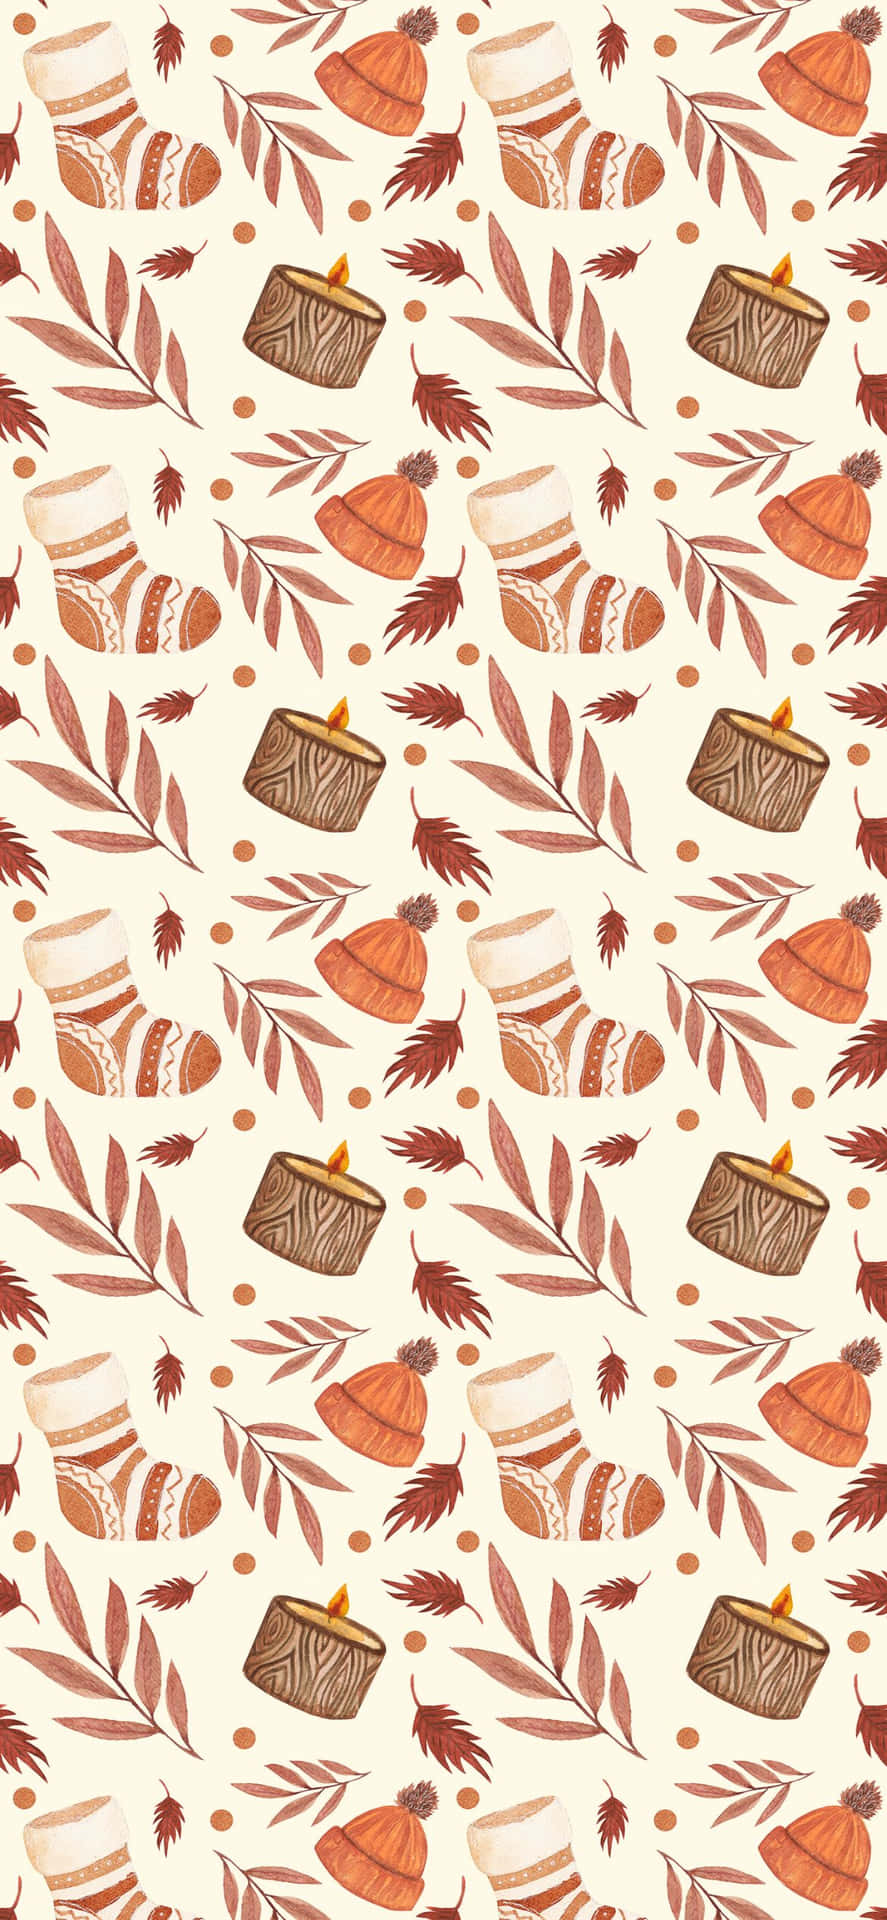 Capture the essence of Fall with this colorful autumn leaves background